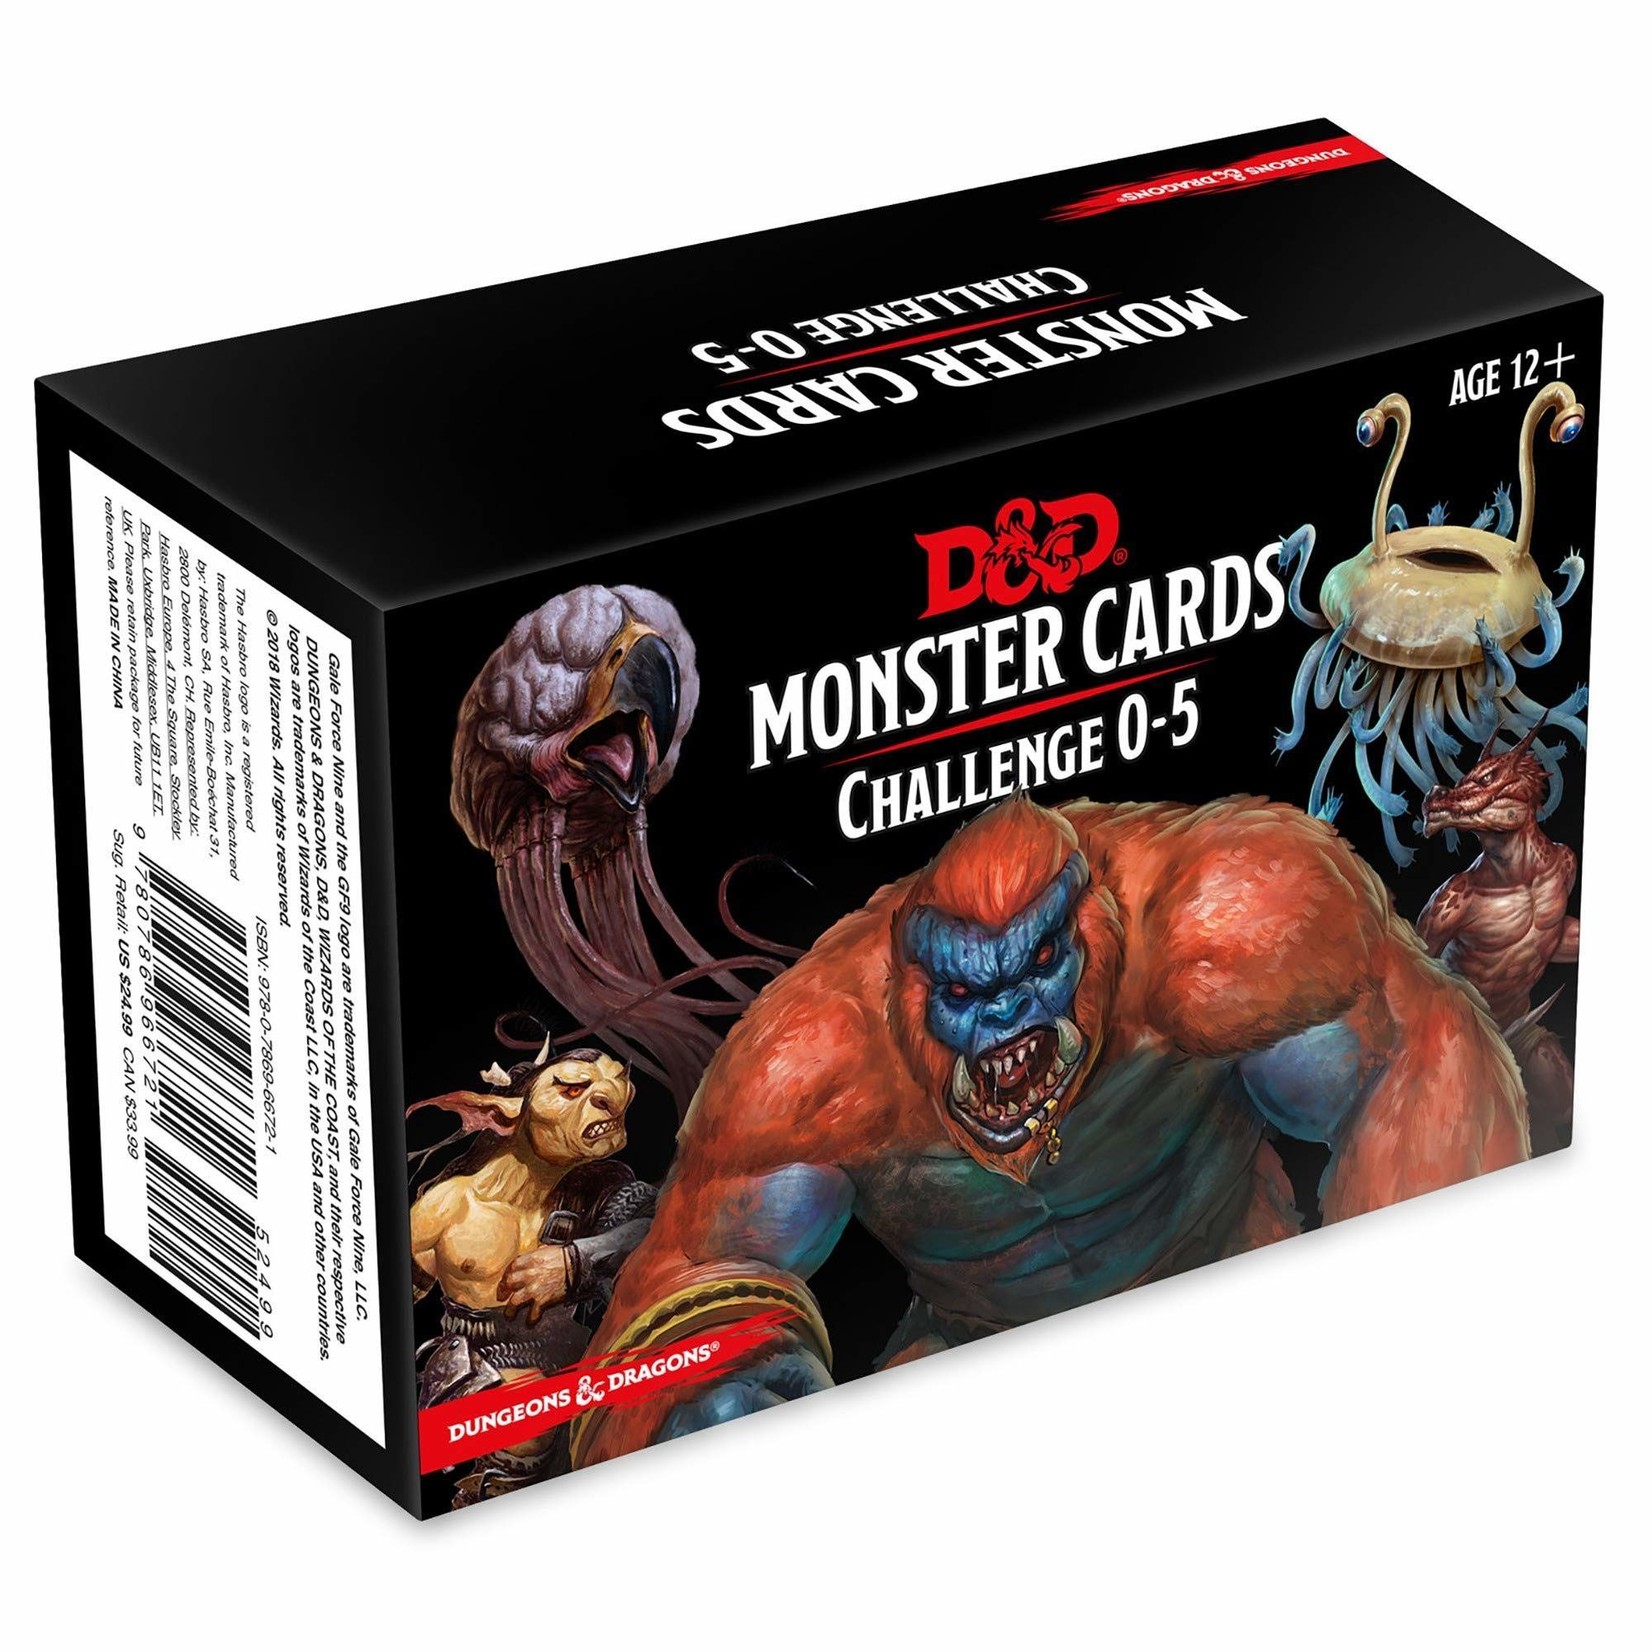 Gale Force 9 Dungeons and Dragons Monster Cards Challenge 0-5